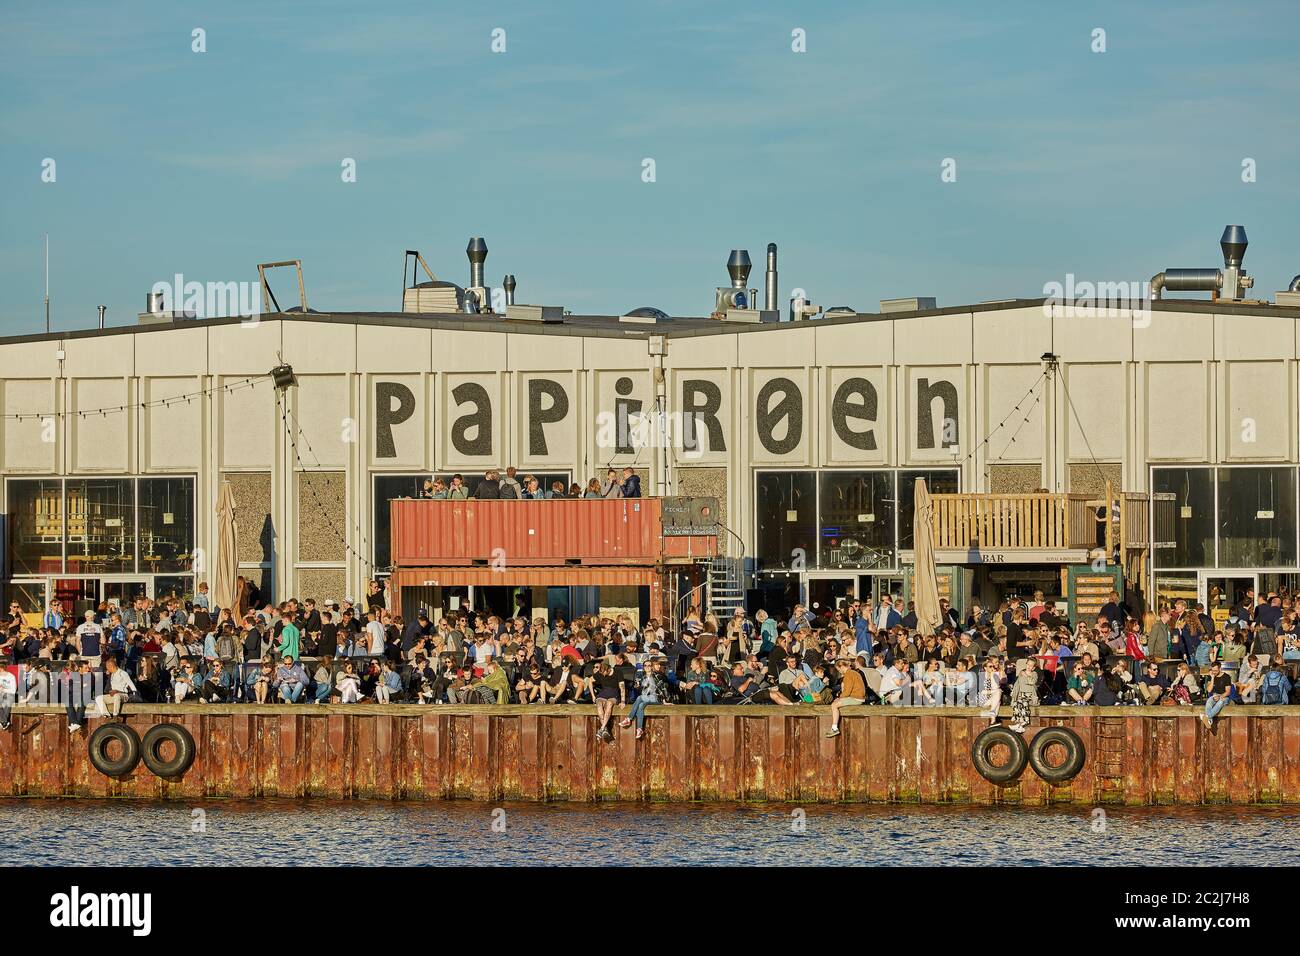 Street food market Papiroen on the paper island in Copenhagen with a lot of  people on the quay Stock Photo - Alamy